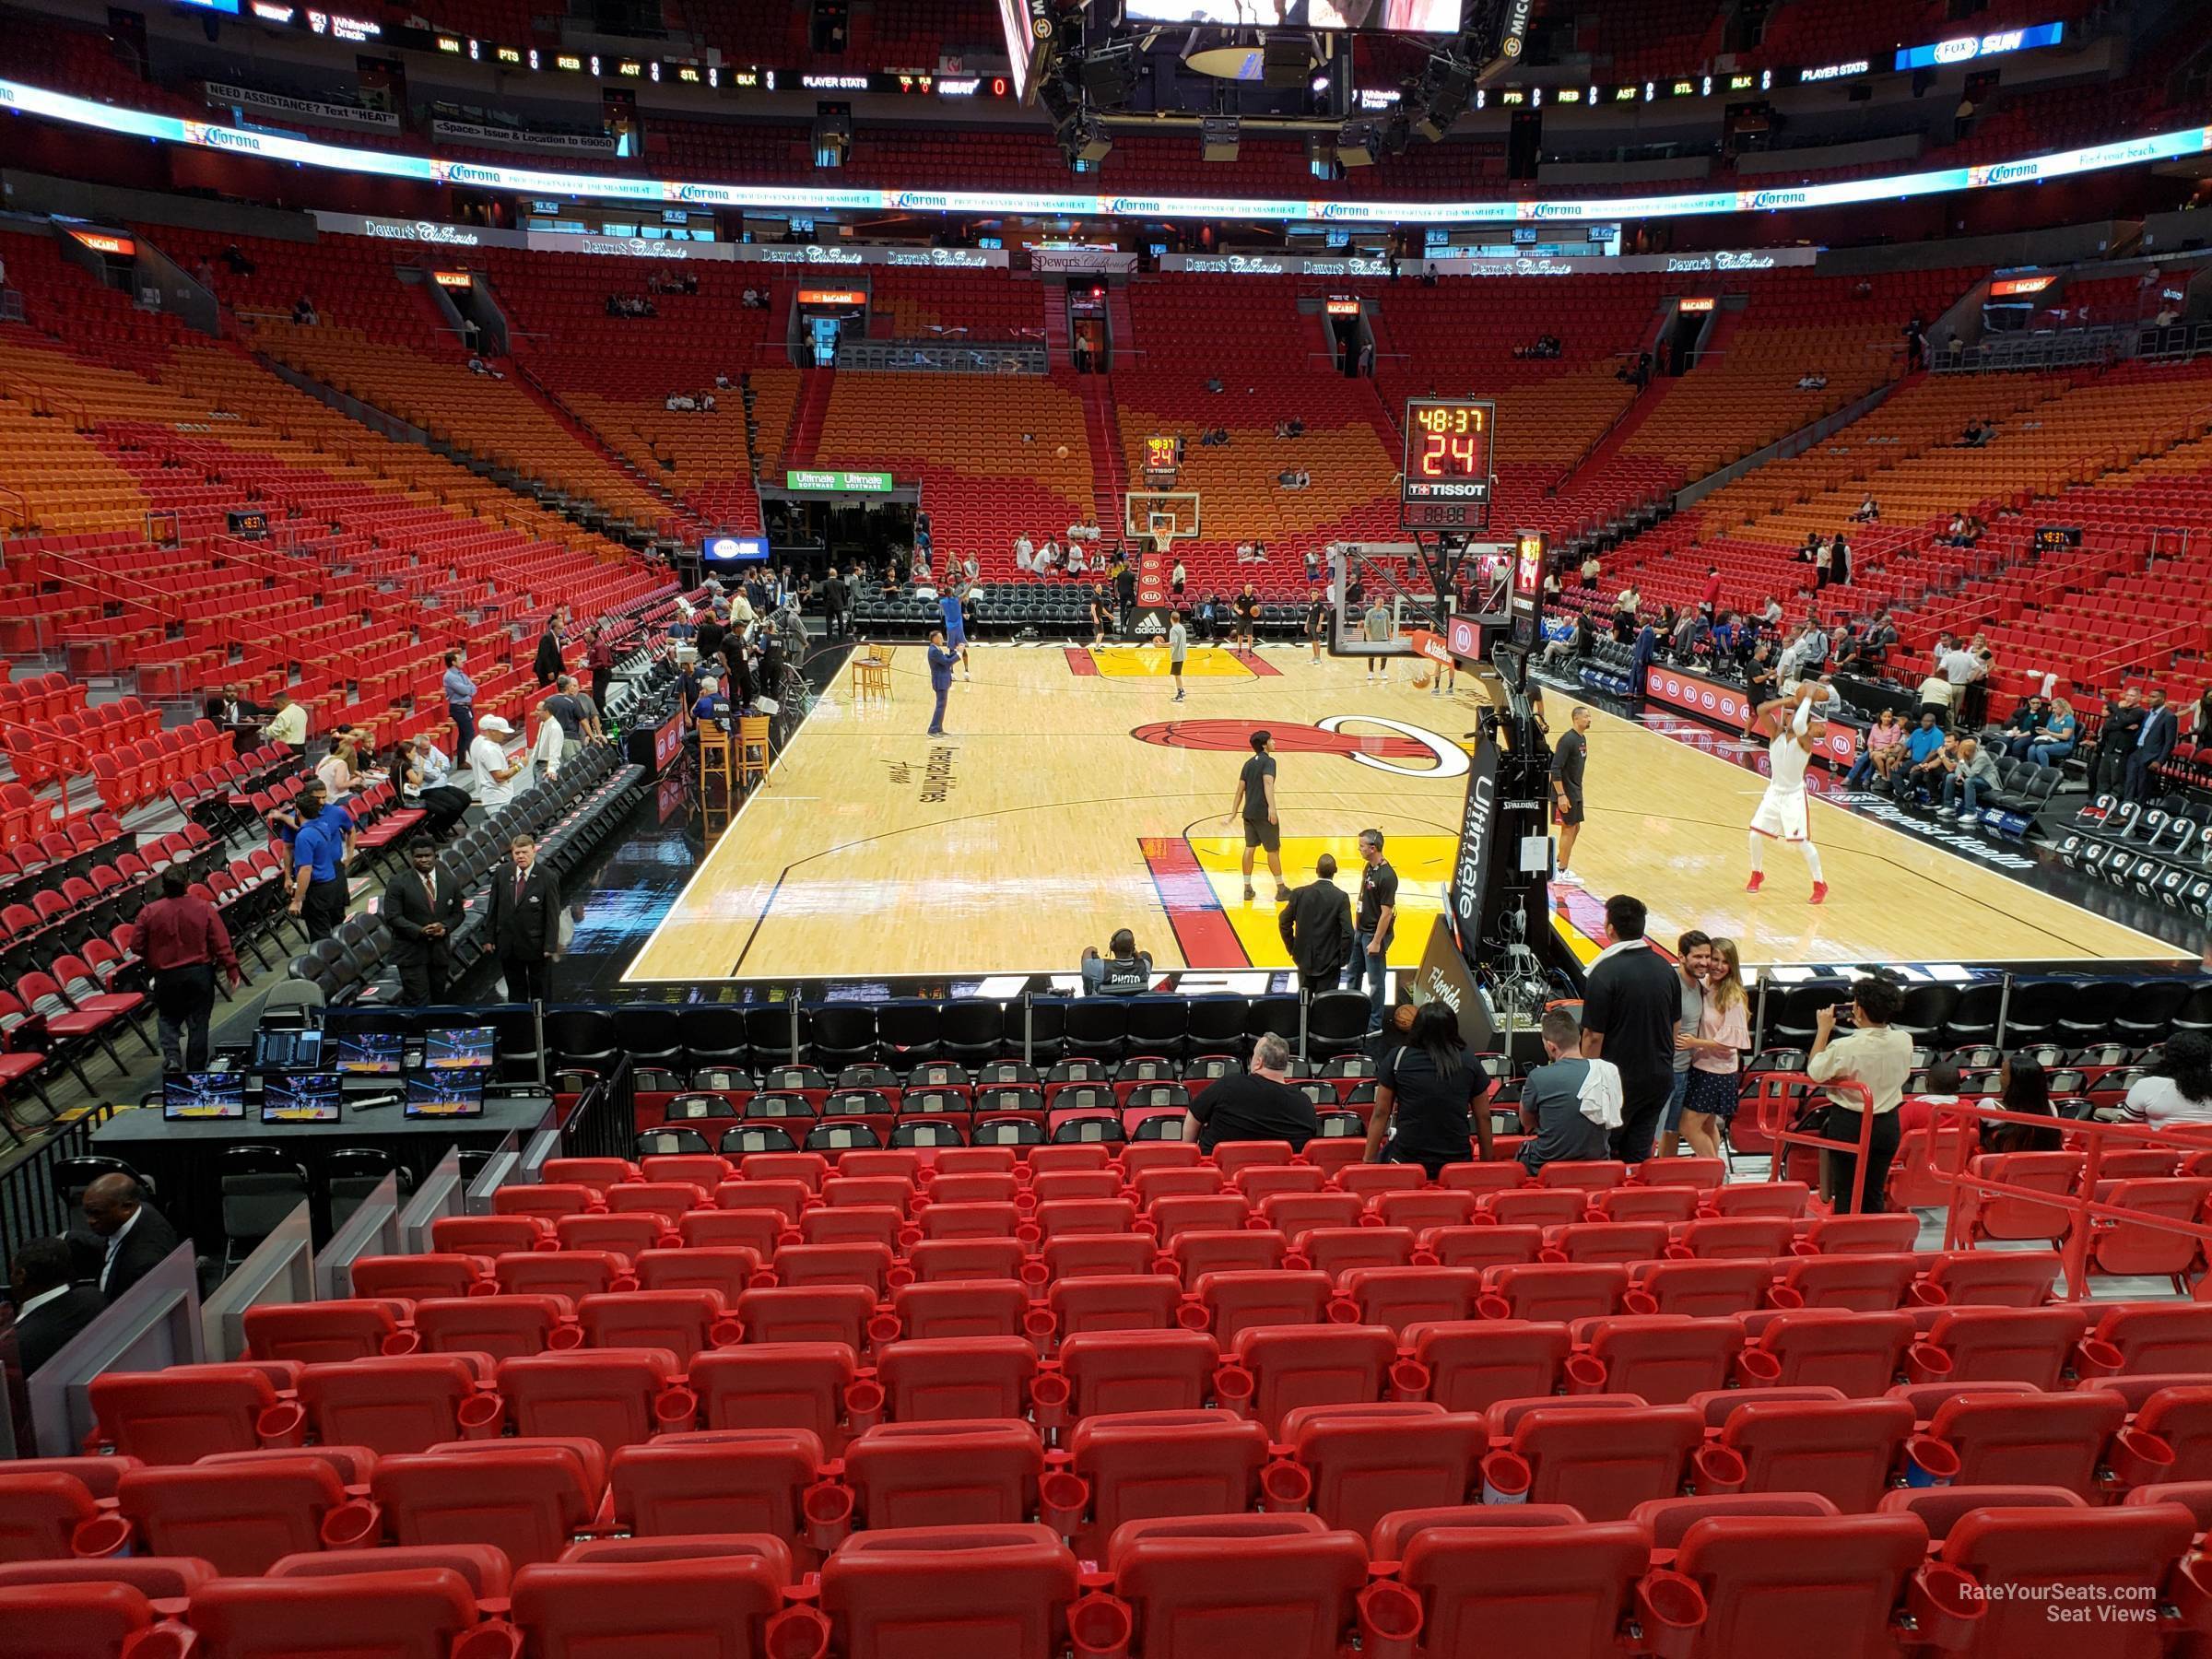 section 113, row 15 seat view  for basketball - miami-dade arena